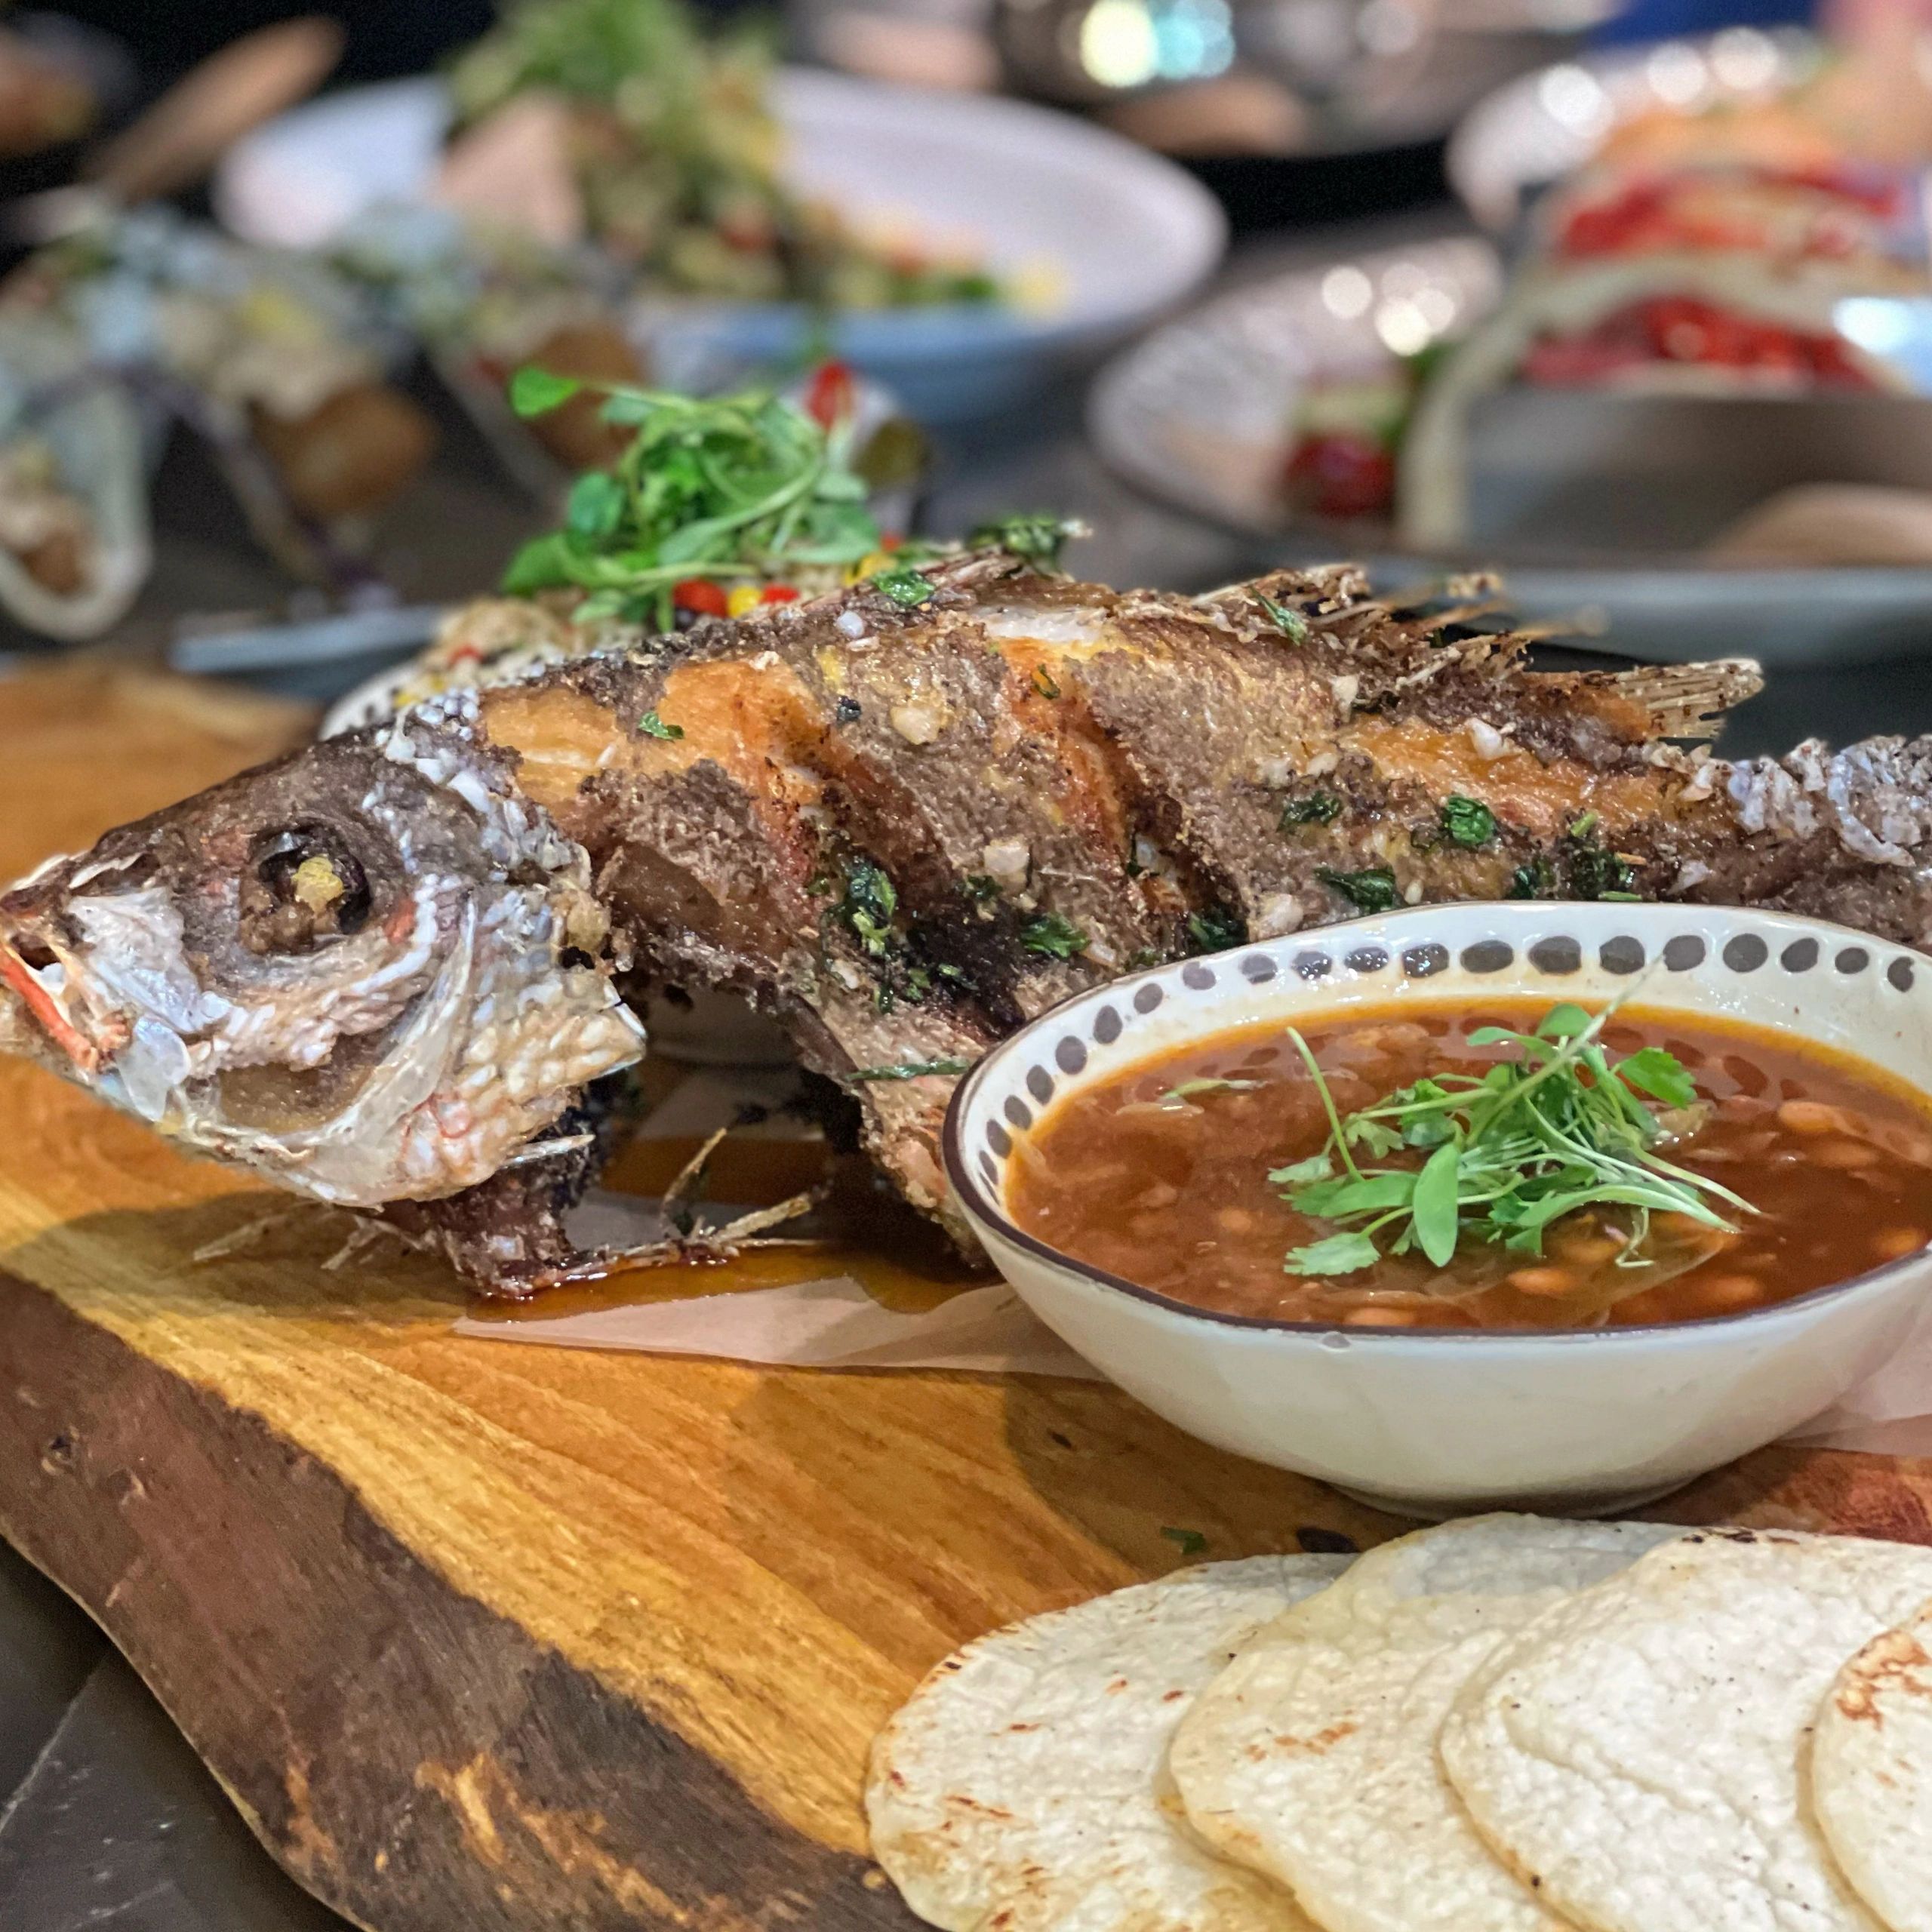 Crispy whole fish served on a wooden plank, with tortillas and pinto beans